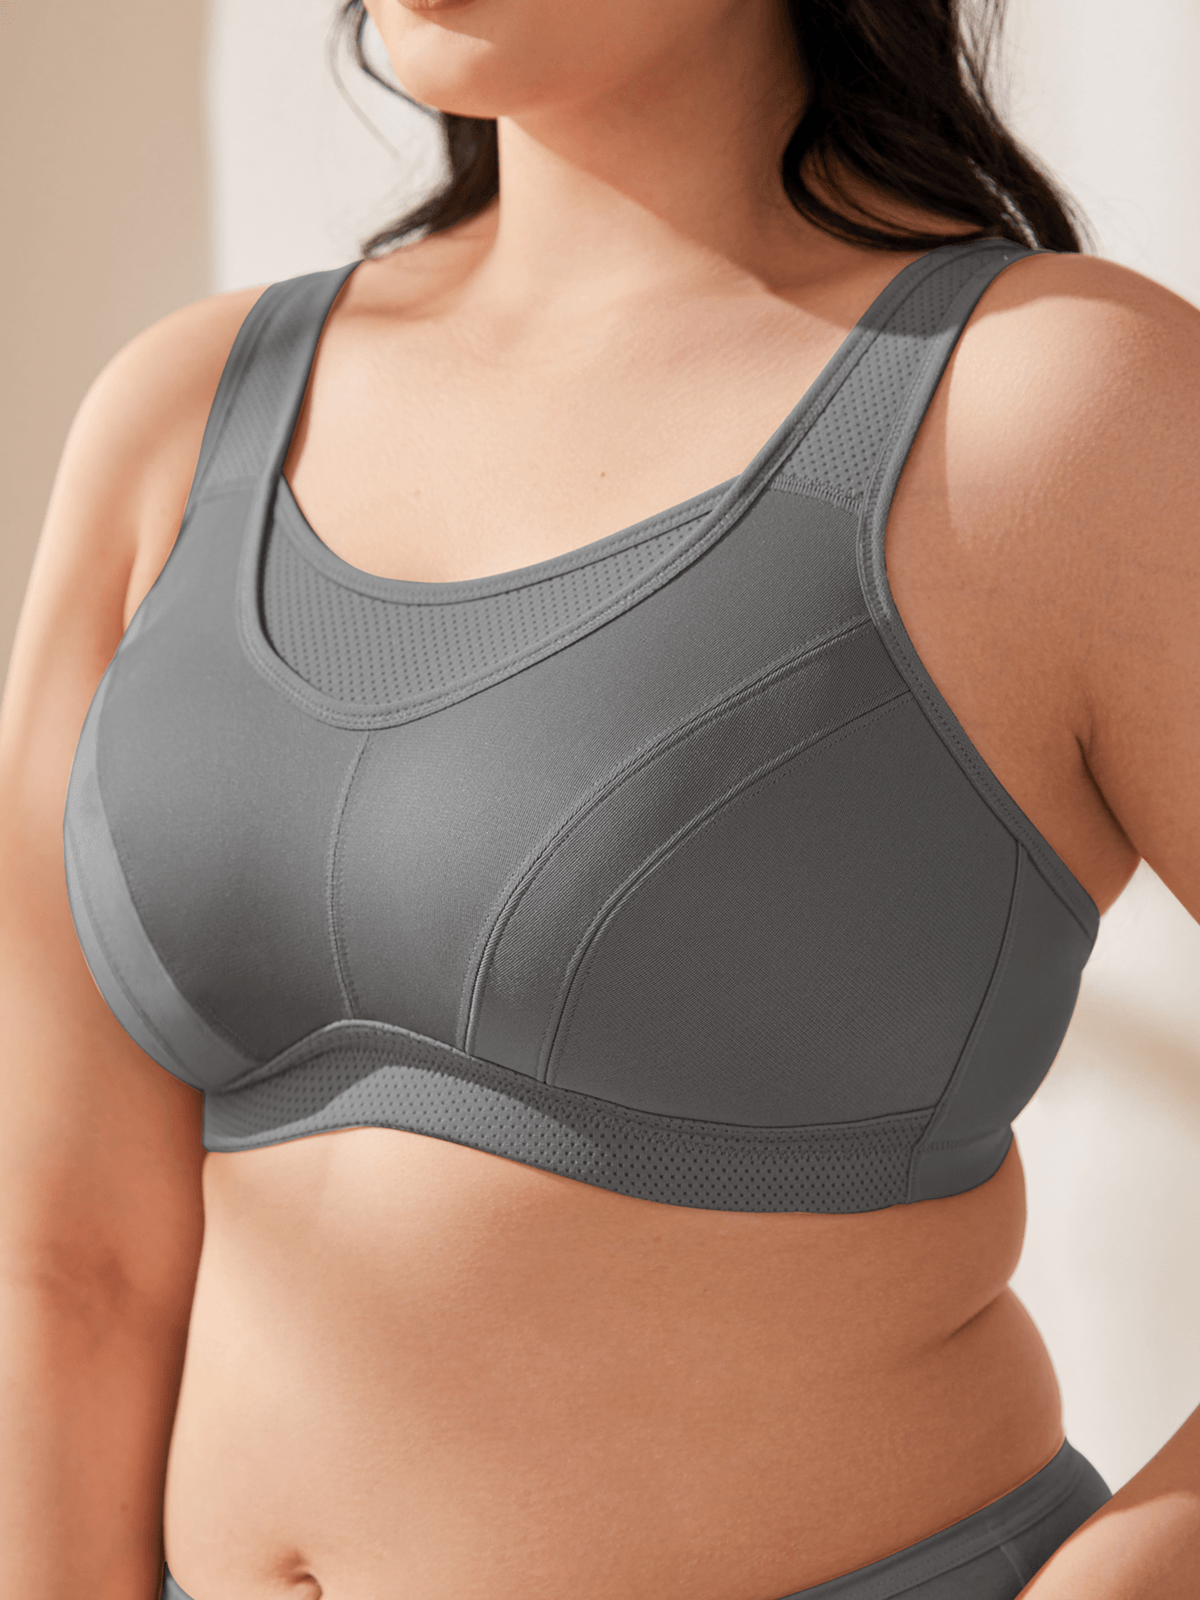 Womens Yoga Gray Sports Bra With High Support And Logo For Large